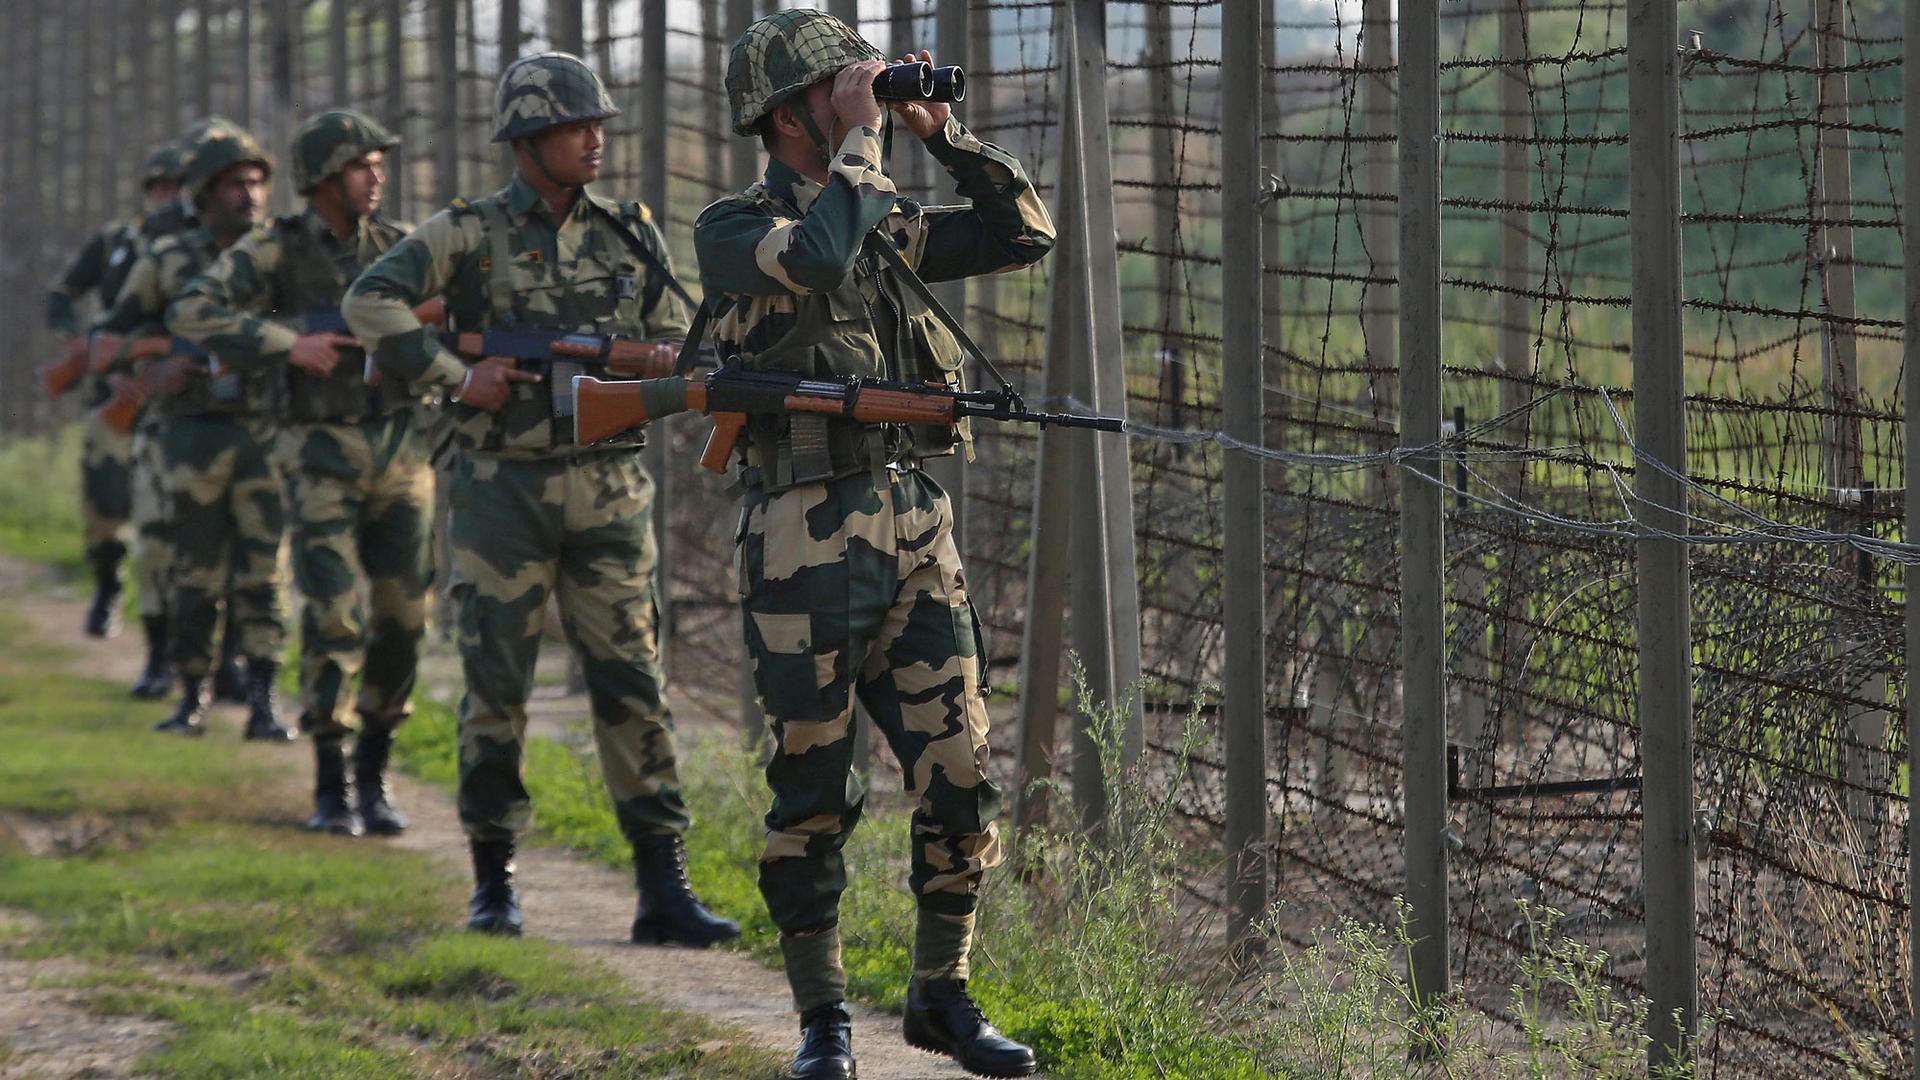 Six of India's Border Security Force soldiers are shown talking along the fenced border in a line.